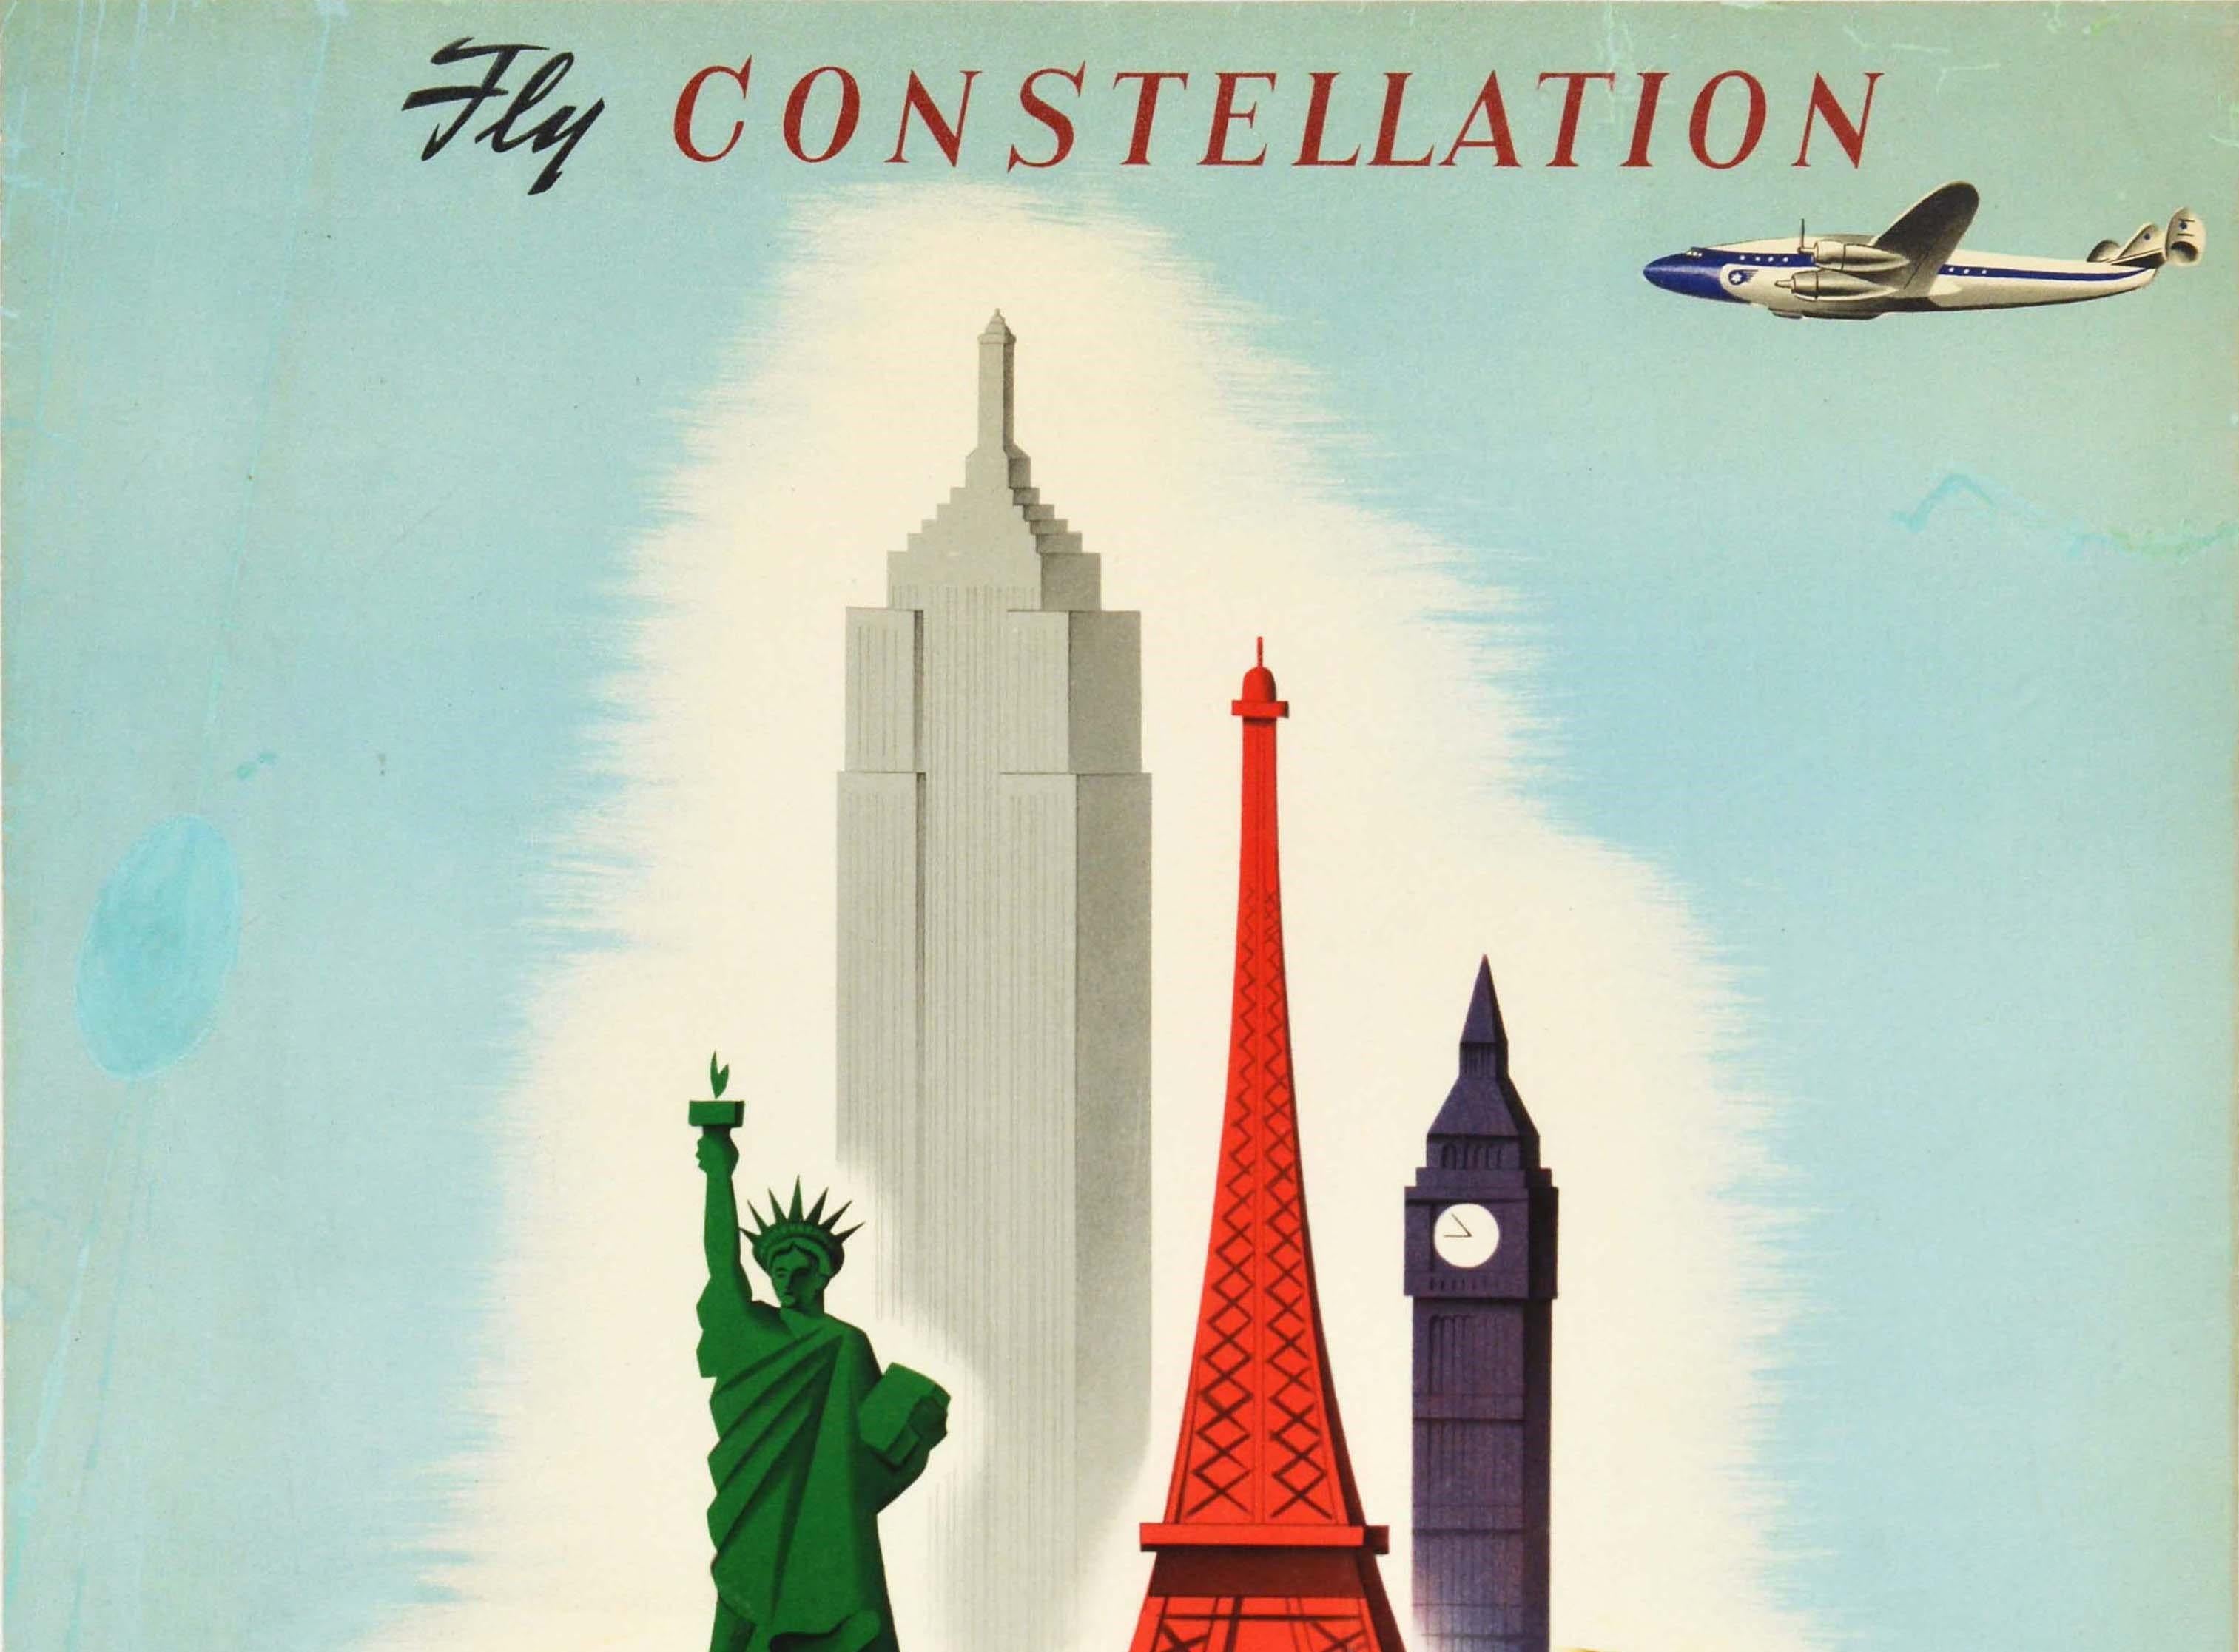 Original vintage air travel advertising poster - Fly Constellation to Four Continents El Al Israel Airlines - featuring a great design by the Israeli graphic designer Franz Krausz (1905-1998) depicting famous landmarks from different countries on